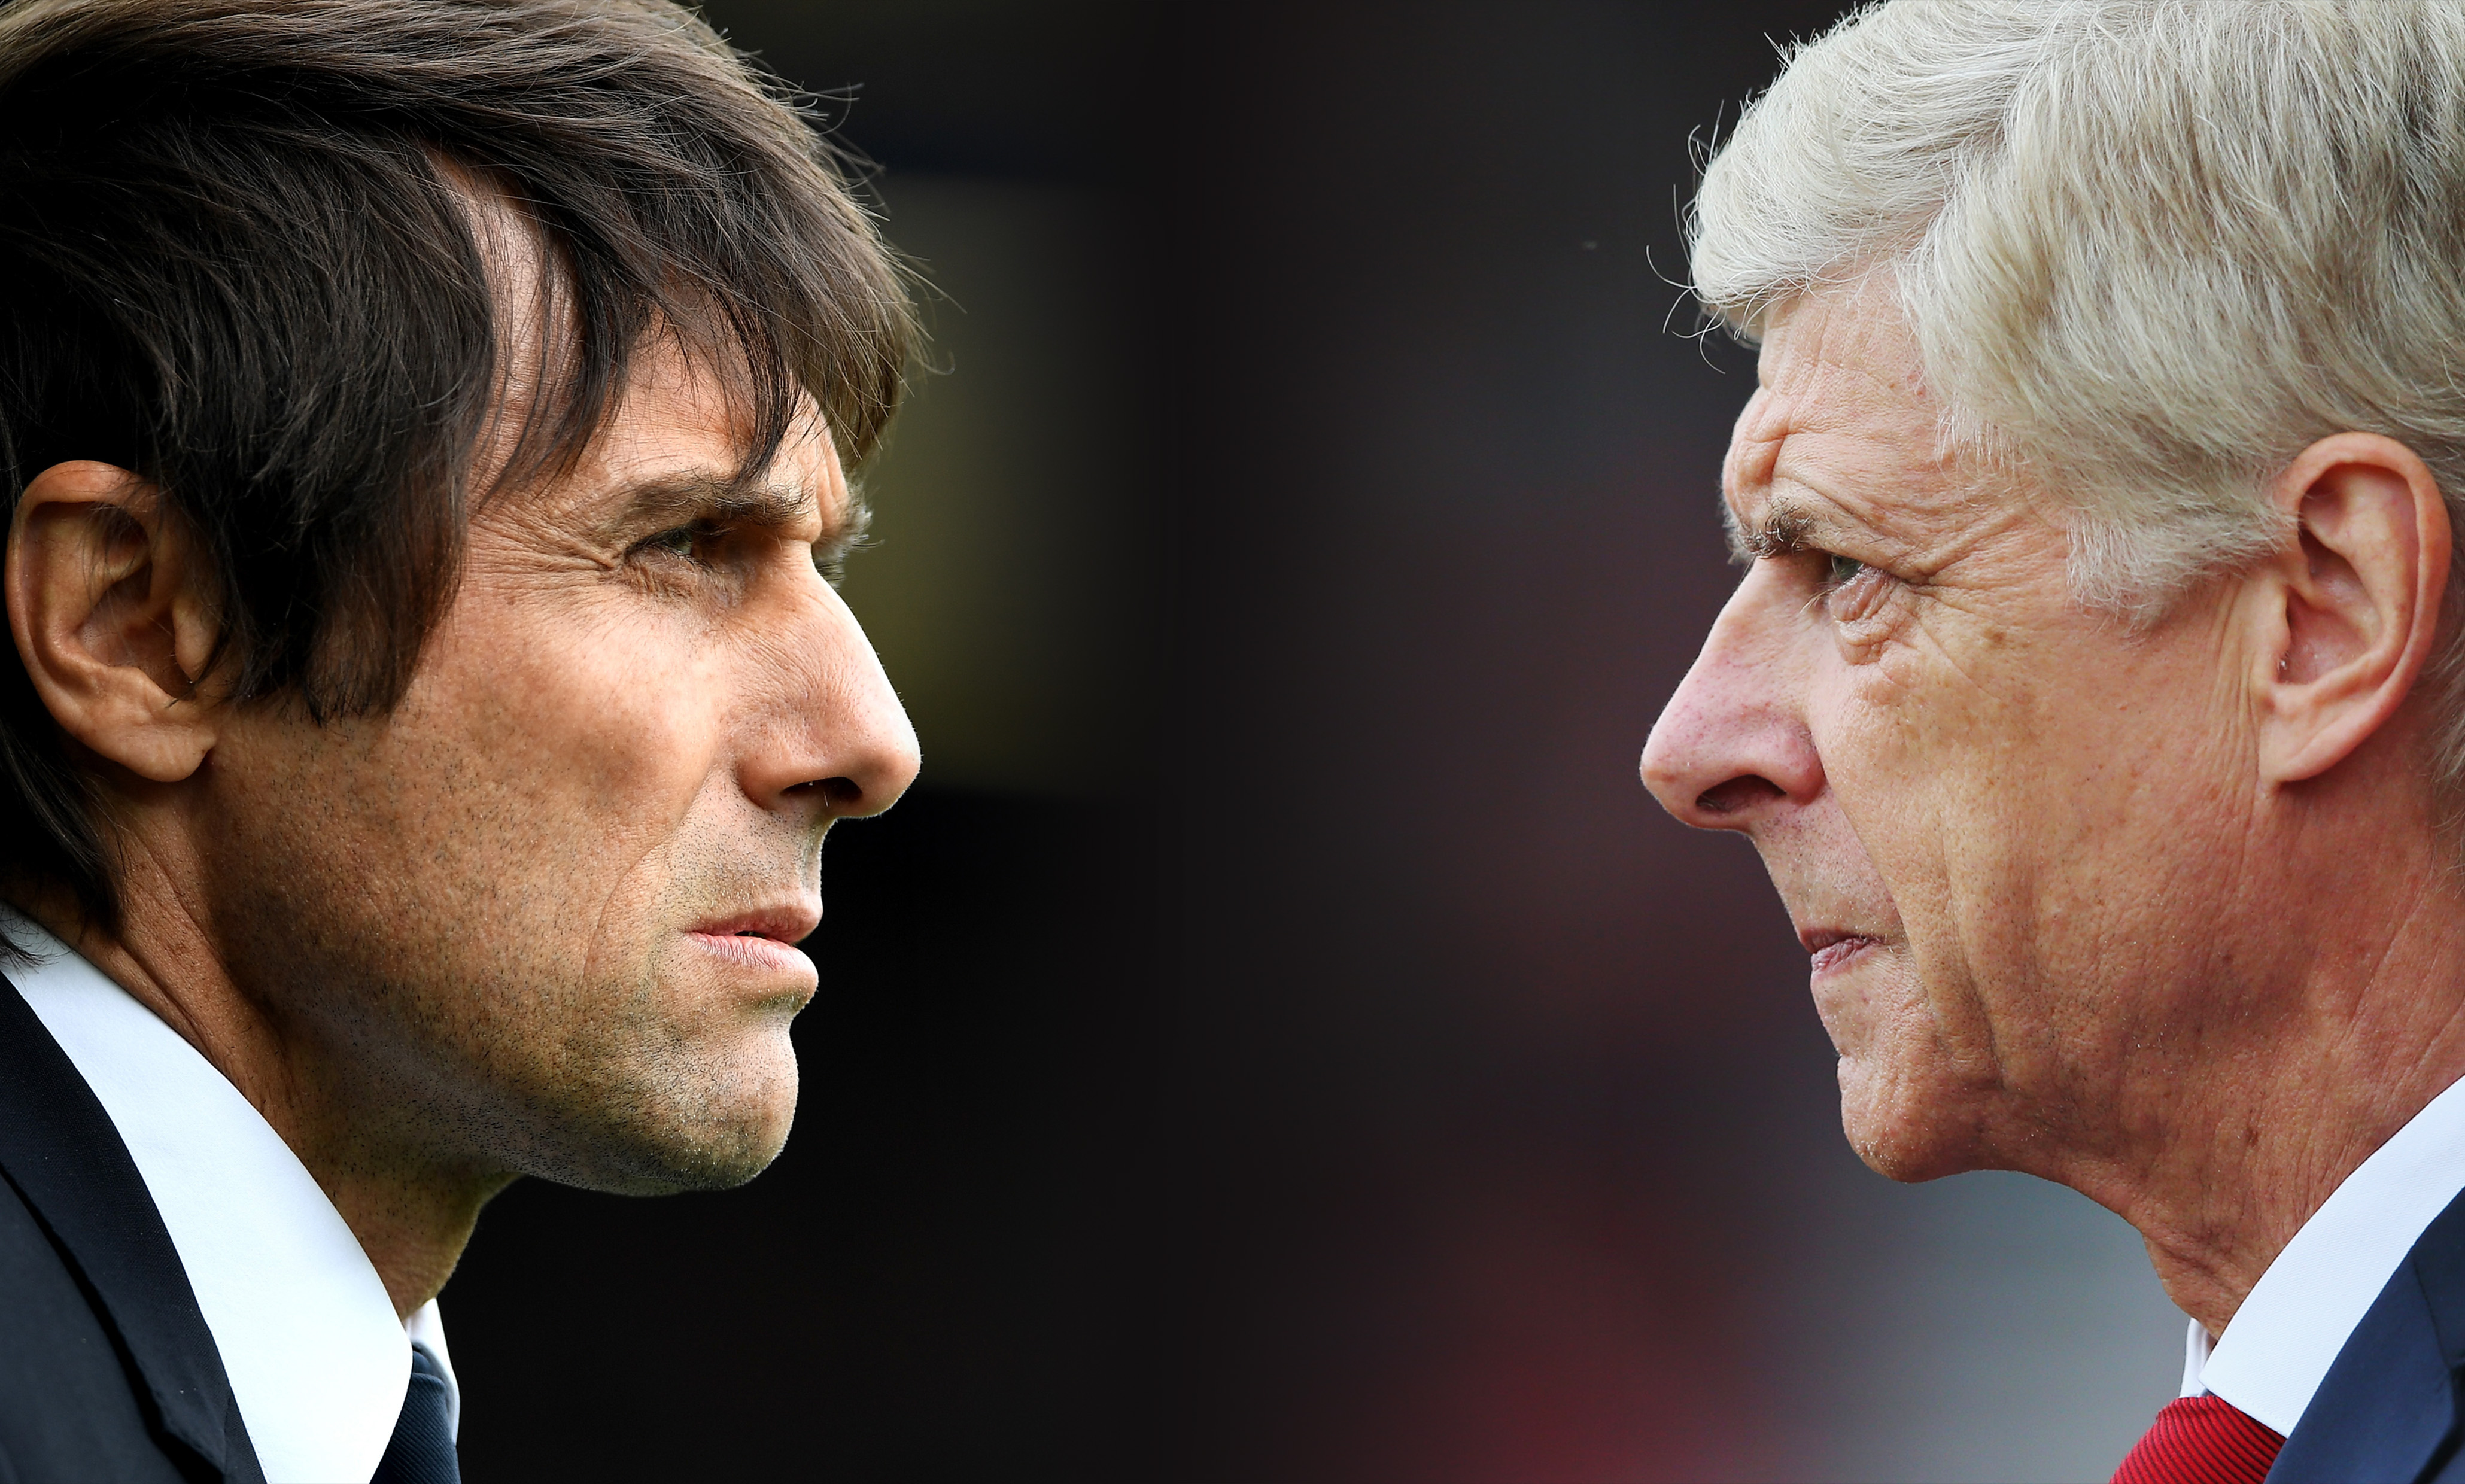 FILE PHOTO (EDITORS NOTE: GRADIENT ADDED - COMPOSITE OF TWO IMAGES - Image numbers (L) 675114354 and 835537244) In this composite image a comparison has been made between Antonio Conte, Manager of Chelsea and Arsene Wenger, Manager of Arsenal. Chelsea and Arsenal meet in a Premier League match at Stamford Bridge on September 17, 217 in London. ***LEFT IMAGE*** LIVERPOOL, ENGLAND - APRIL 30: Antonio Conte, Manager of Chelsea looks on prior to the Premier League match between Everton and Chelsea at Goodison Park on April 30, 2017 in Liverpool, England. (Photo by Laurence Griffiths/Getty Images) ***RIGHT IMAGE*** STOKE ON TRENT, ENGLAND - AUGUST 19: Arsene Wenger, Manager of Arsenal looks on prior to the Premier League match between Stoke City and Arsenal at Bet365 Stadium on August 19, 2017 in Stoke on Trent, England. (Photo by Alex Livesey/Getty Images)